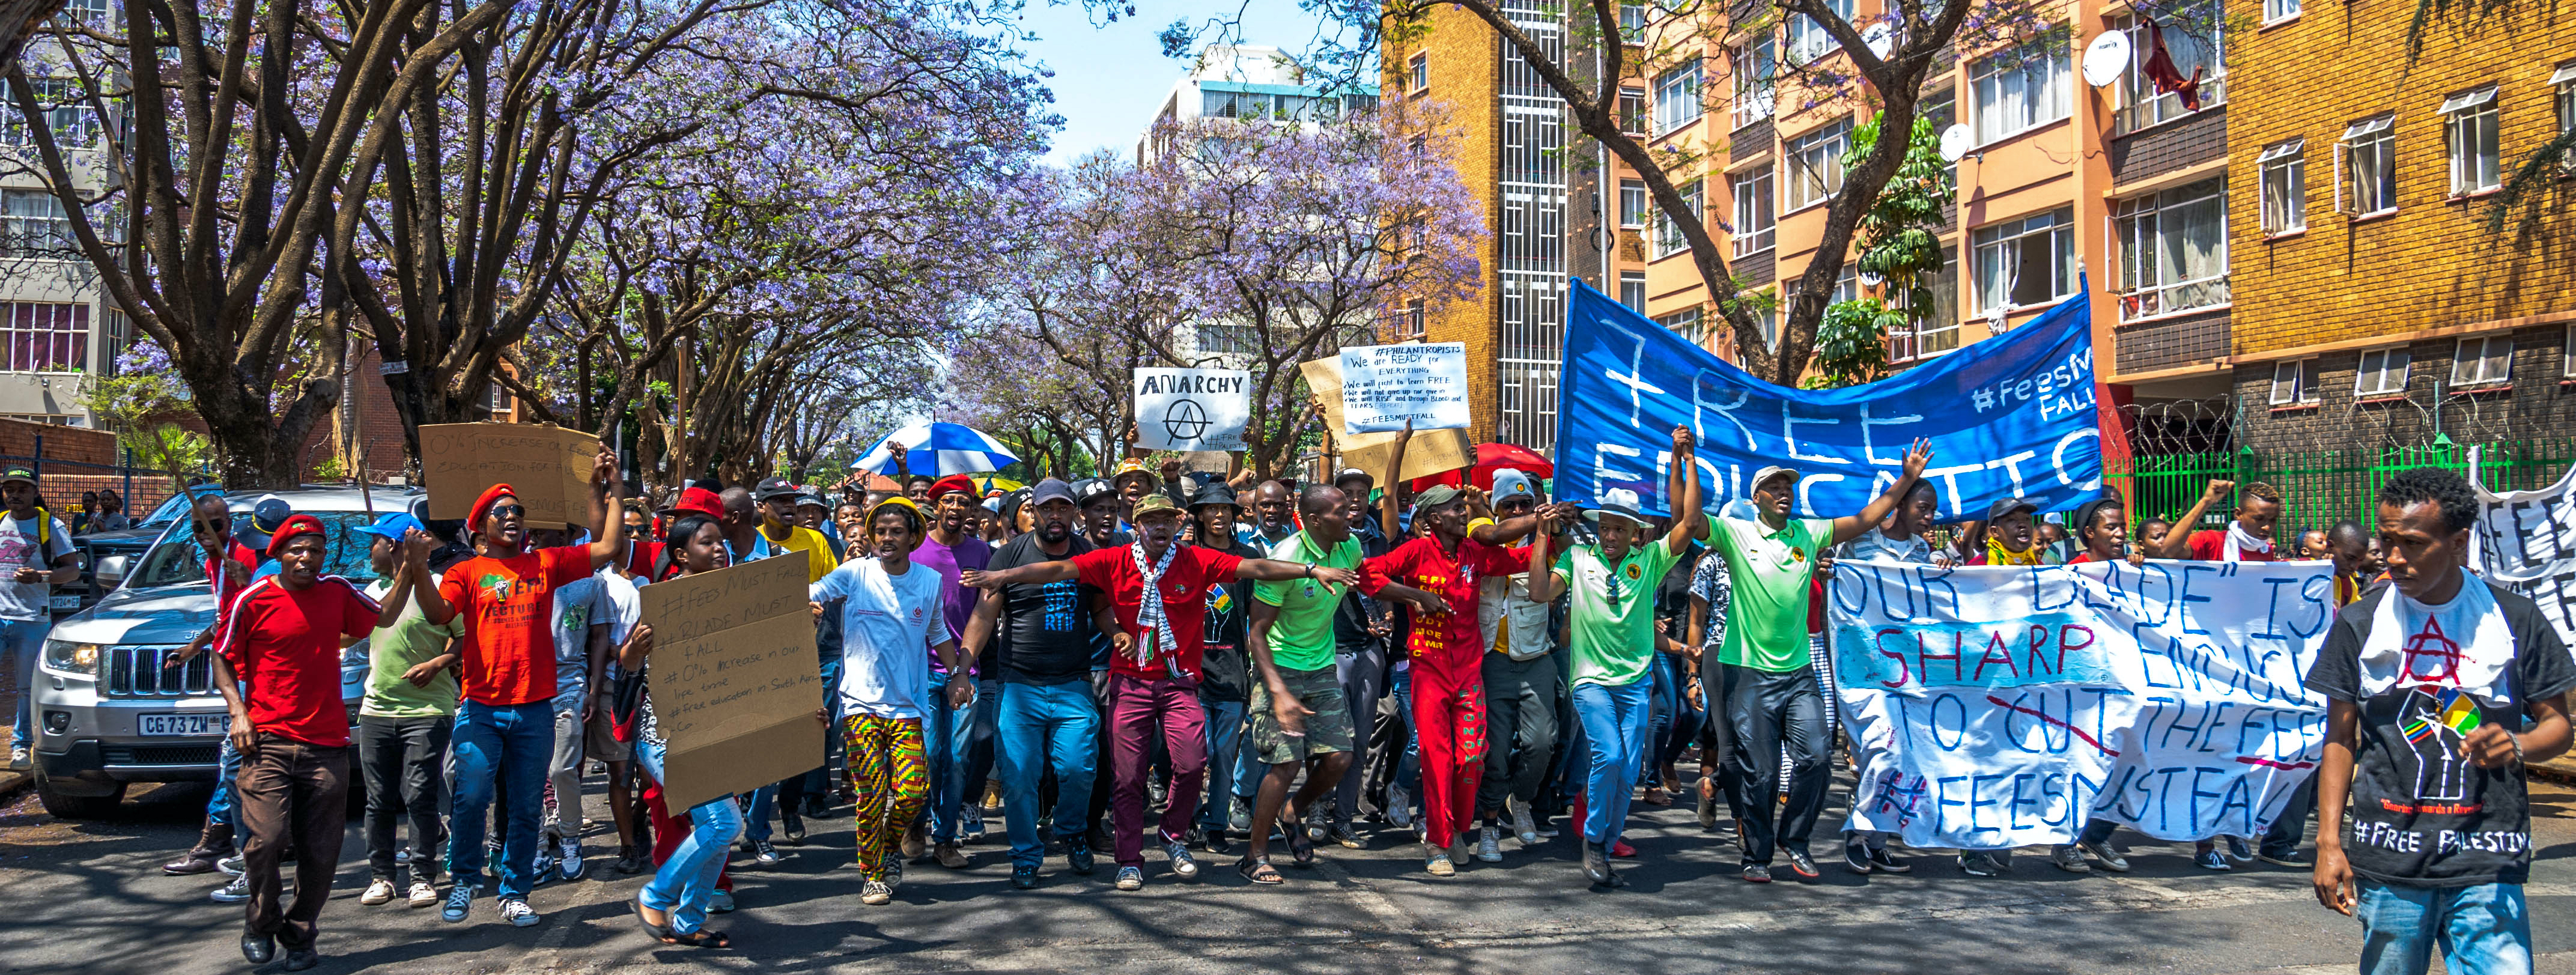 Image of the Fees Must Fall protest, Pretoria South Africa. Editorial credit: paul saad / Shutterstock.com